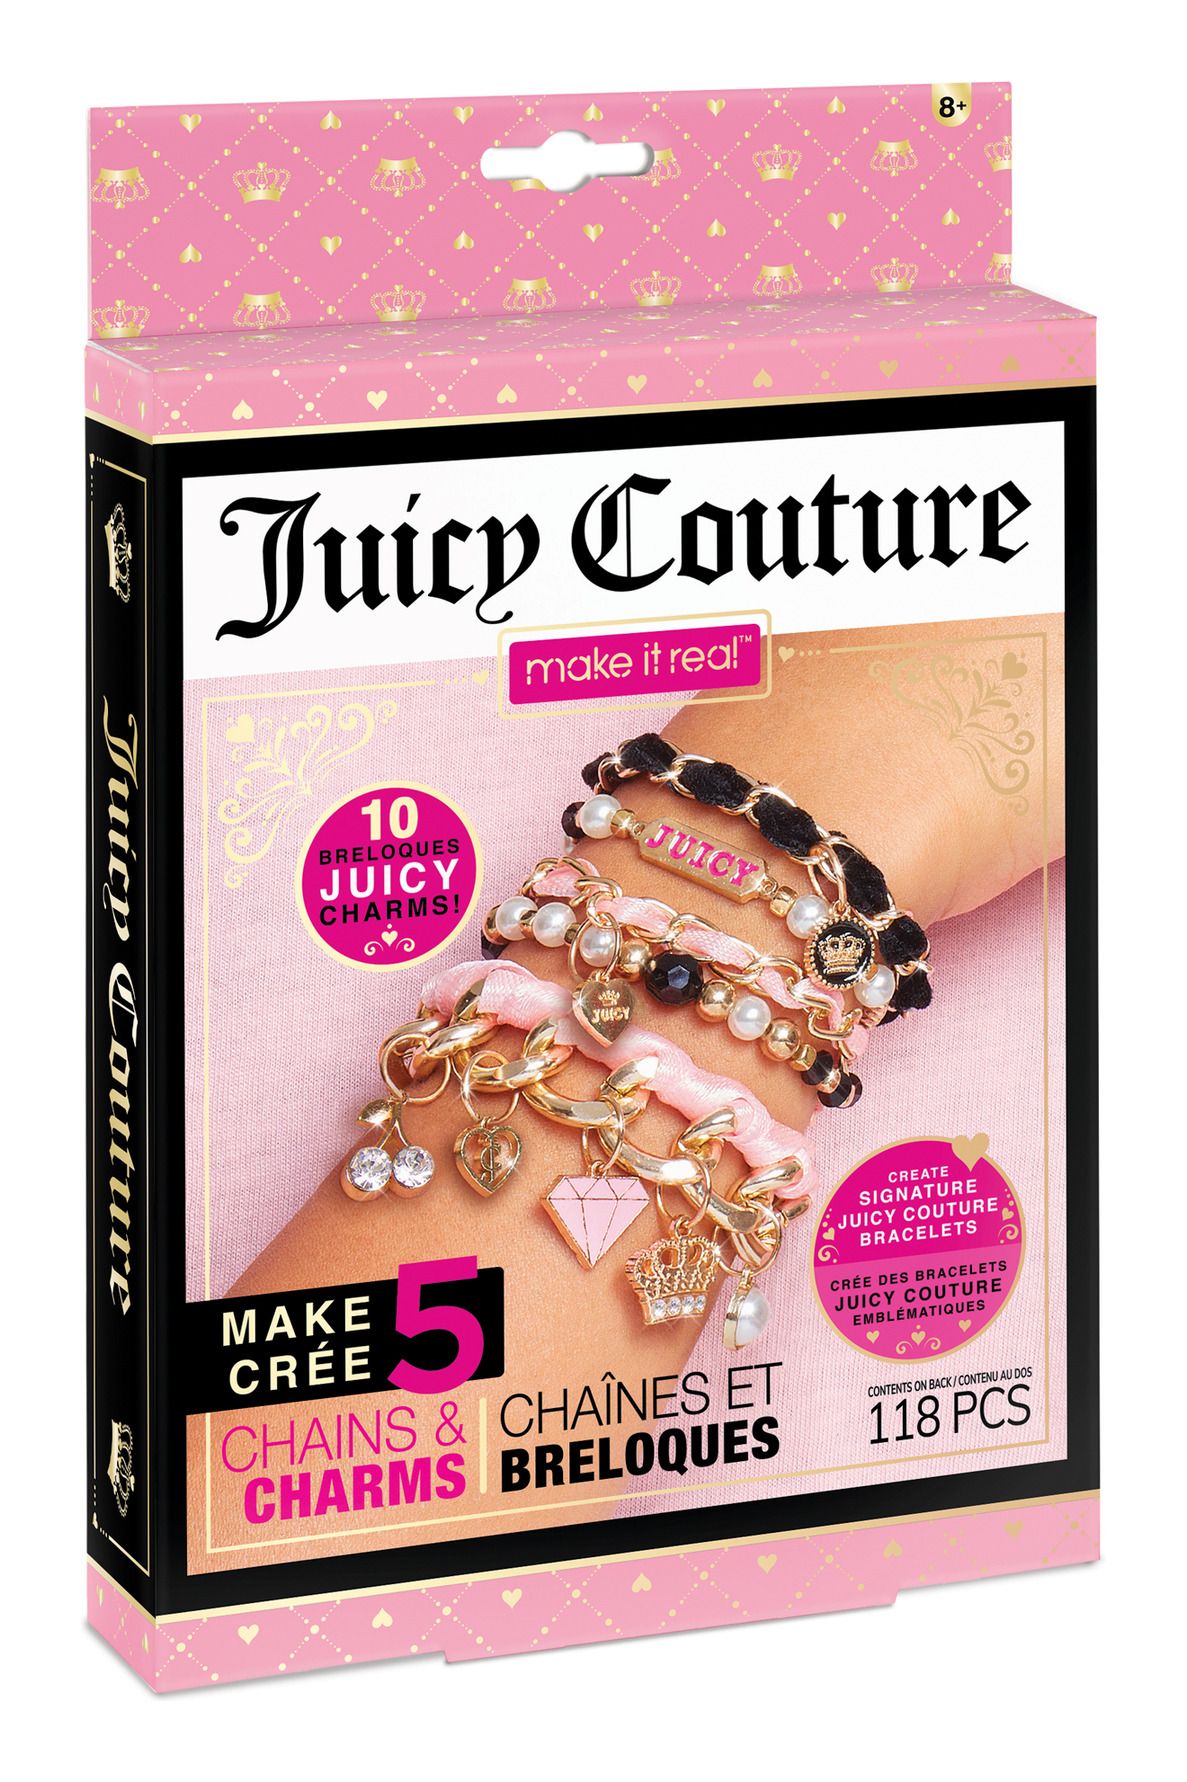 Make It Real Mini Juicy Couture Chains and Charms - Albagame